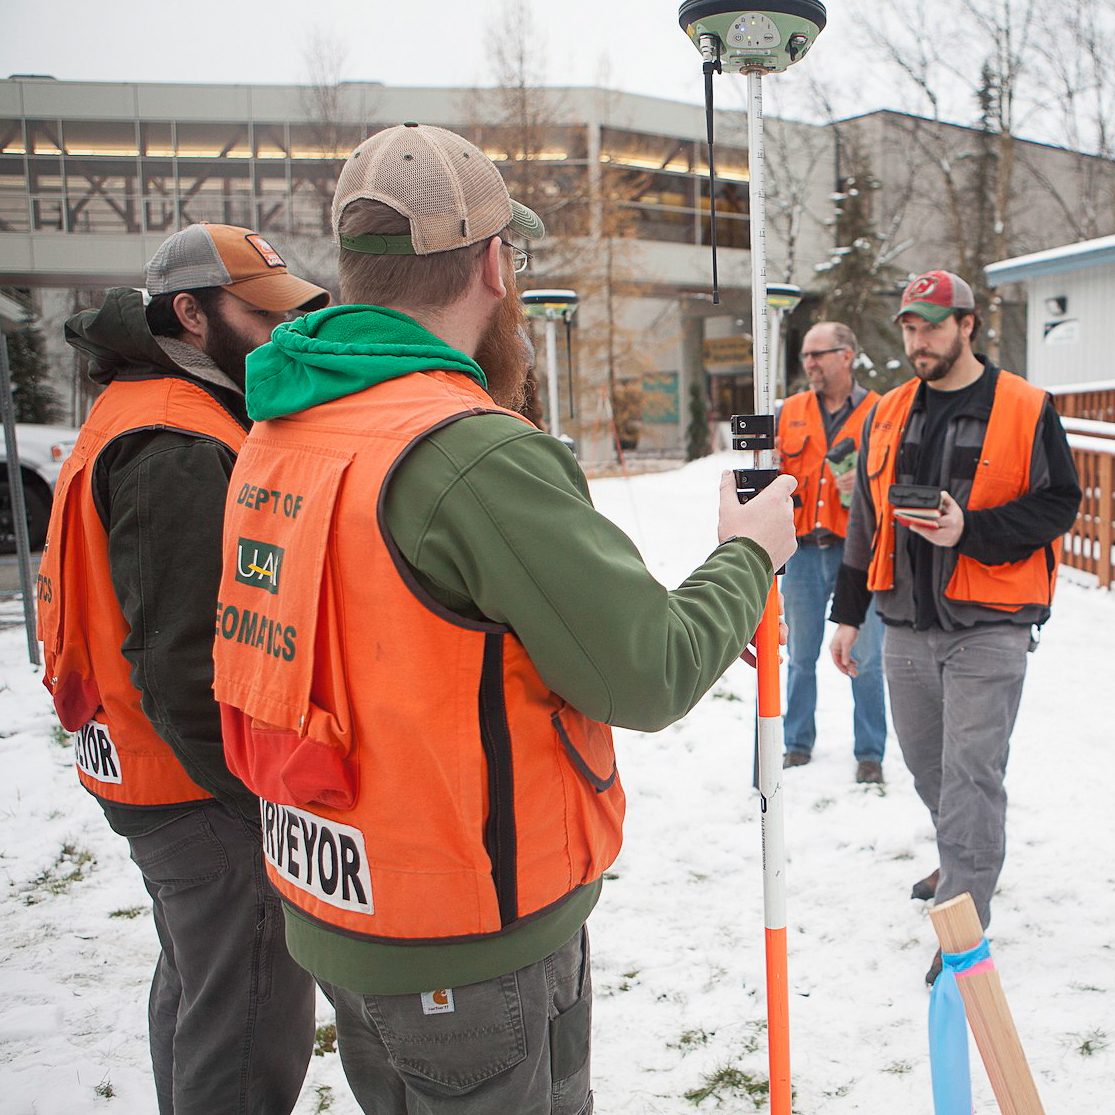 Students standing outdoors using land surveying tools